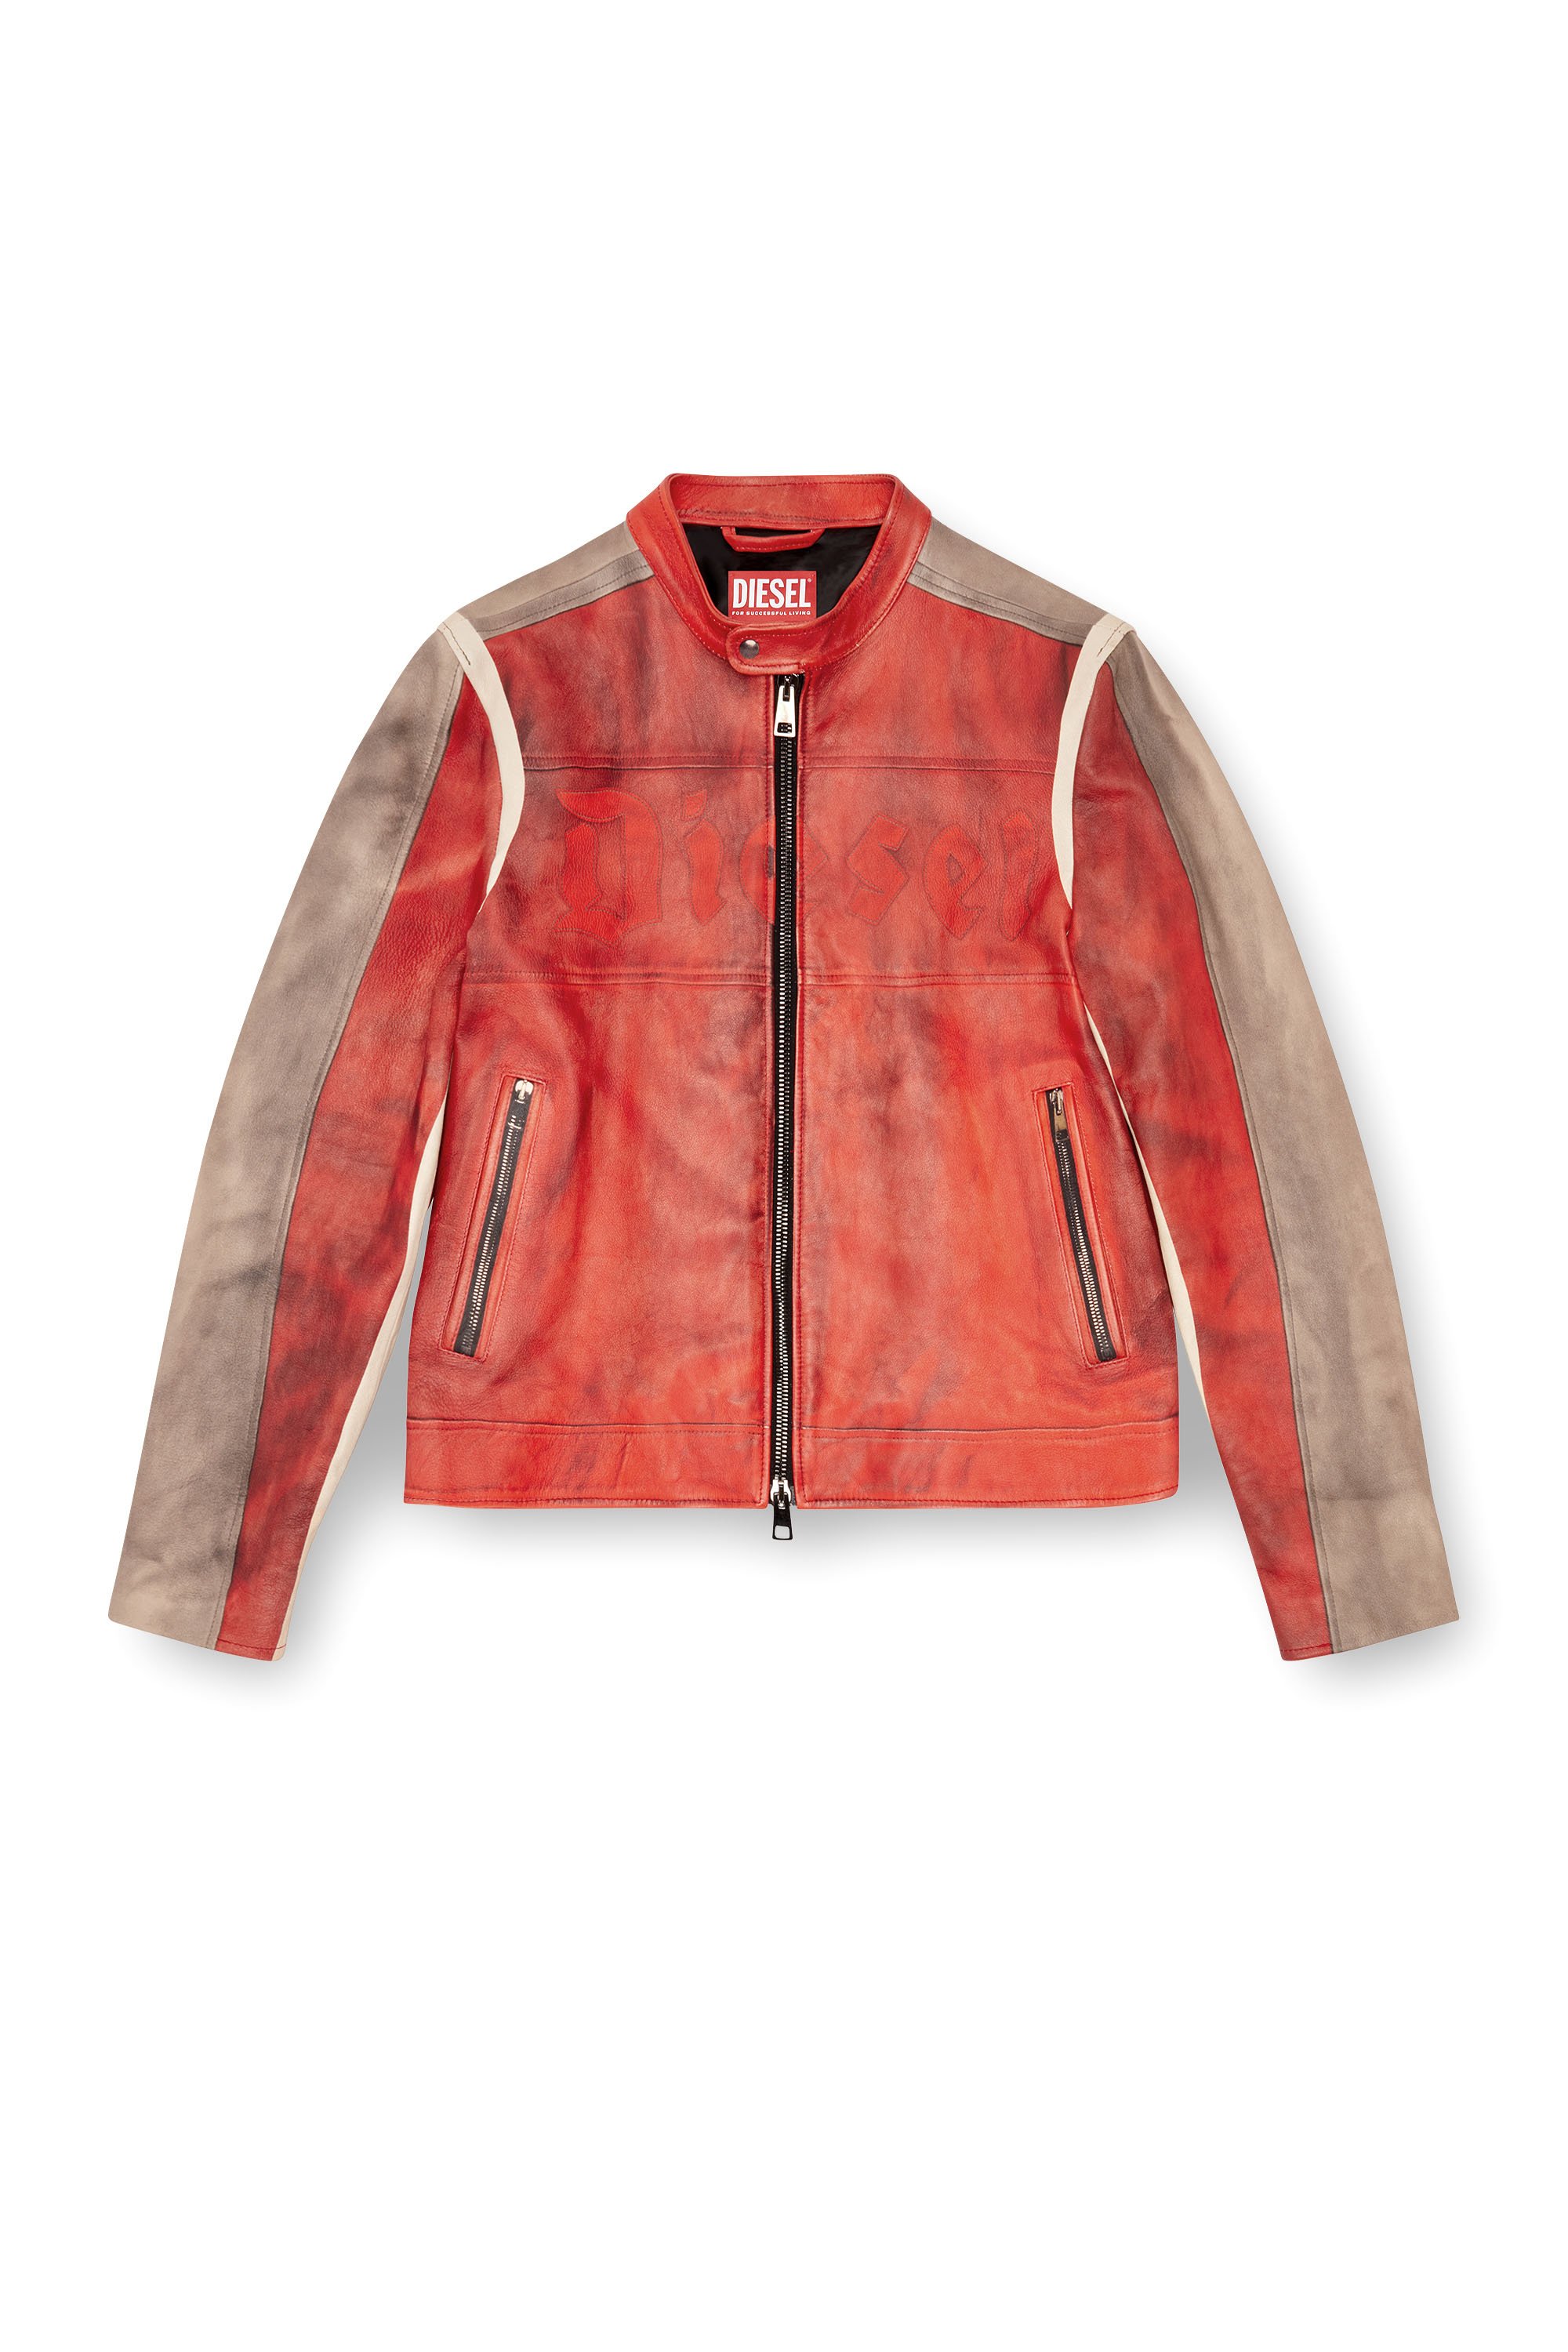 Diesel - L-RUSCHA, Uomo Giacca biker in pelle effetto dirty in Rosso - Image 3